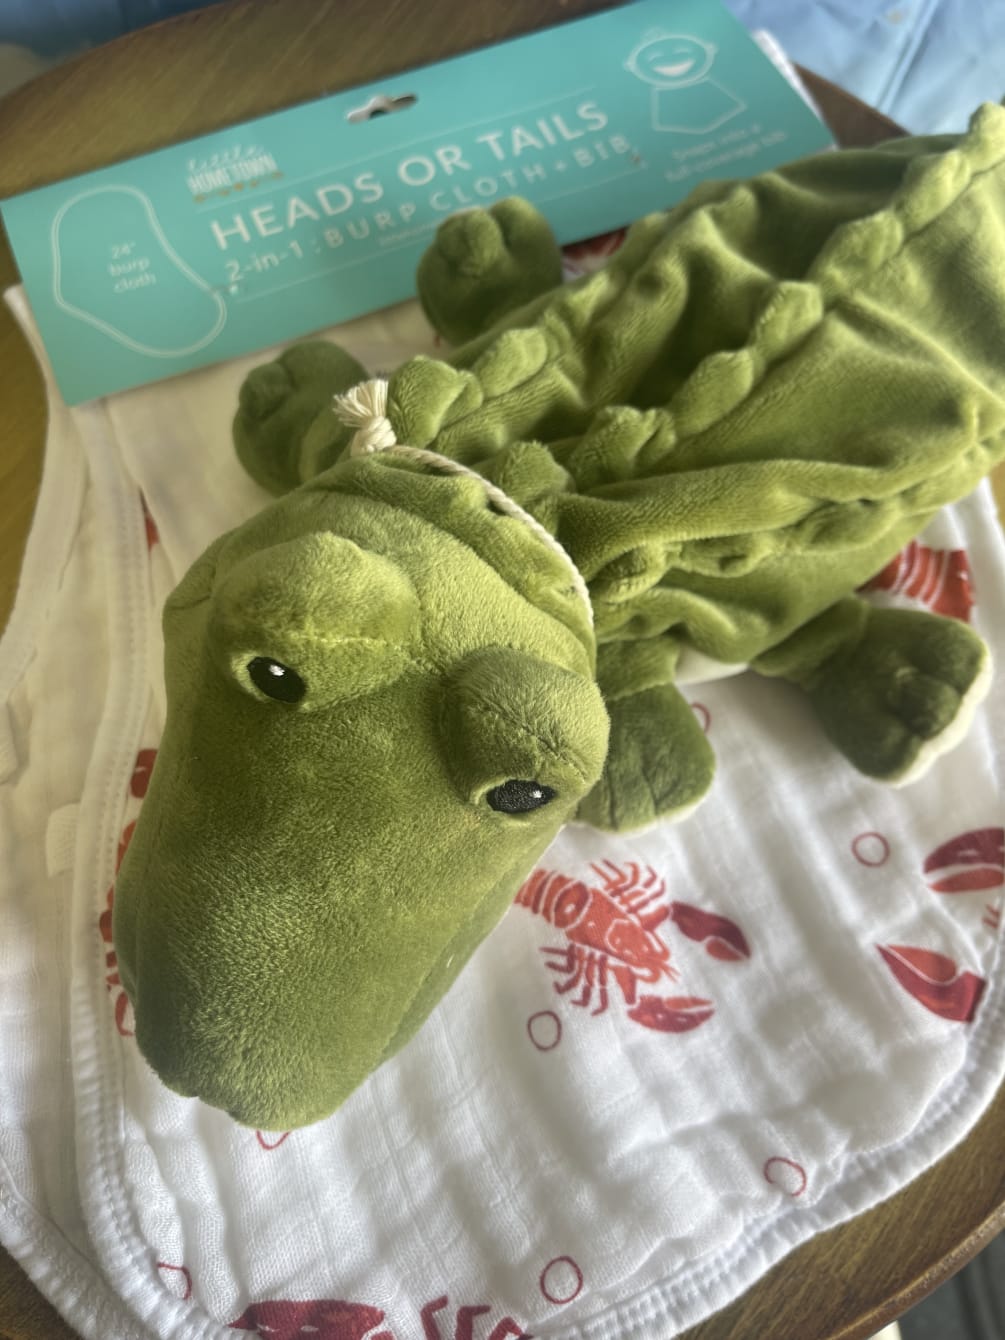 Bib cloth and Alligator warmie makes a great gift for the newest